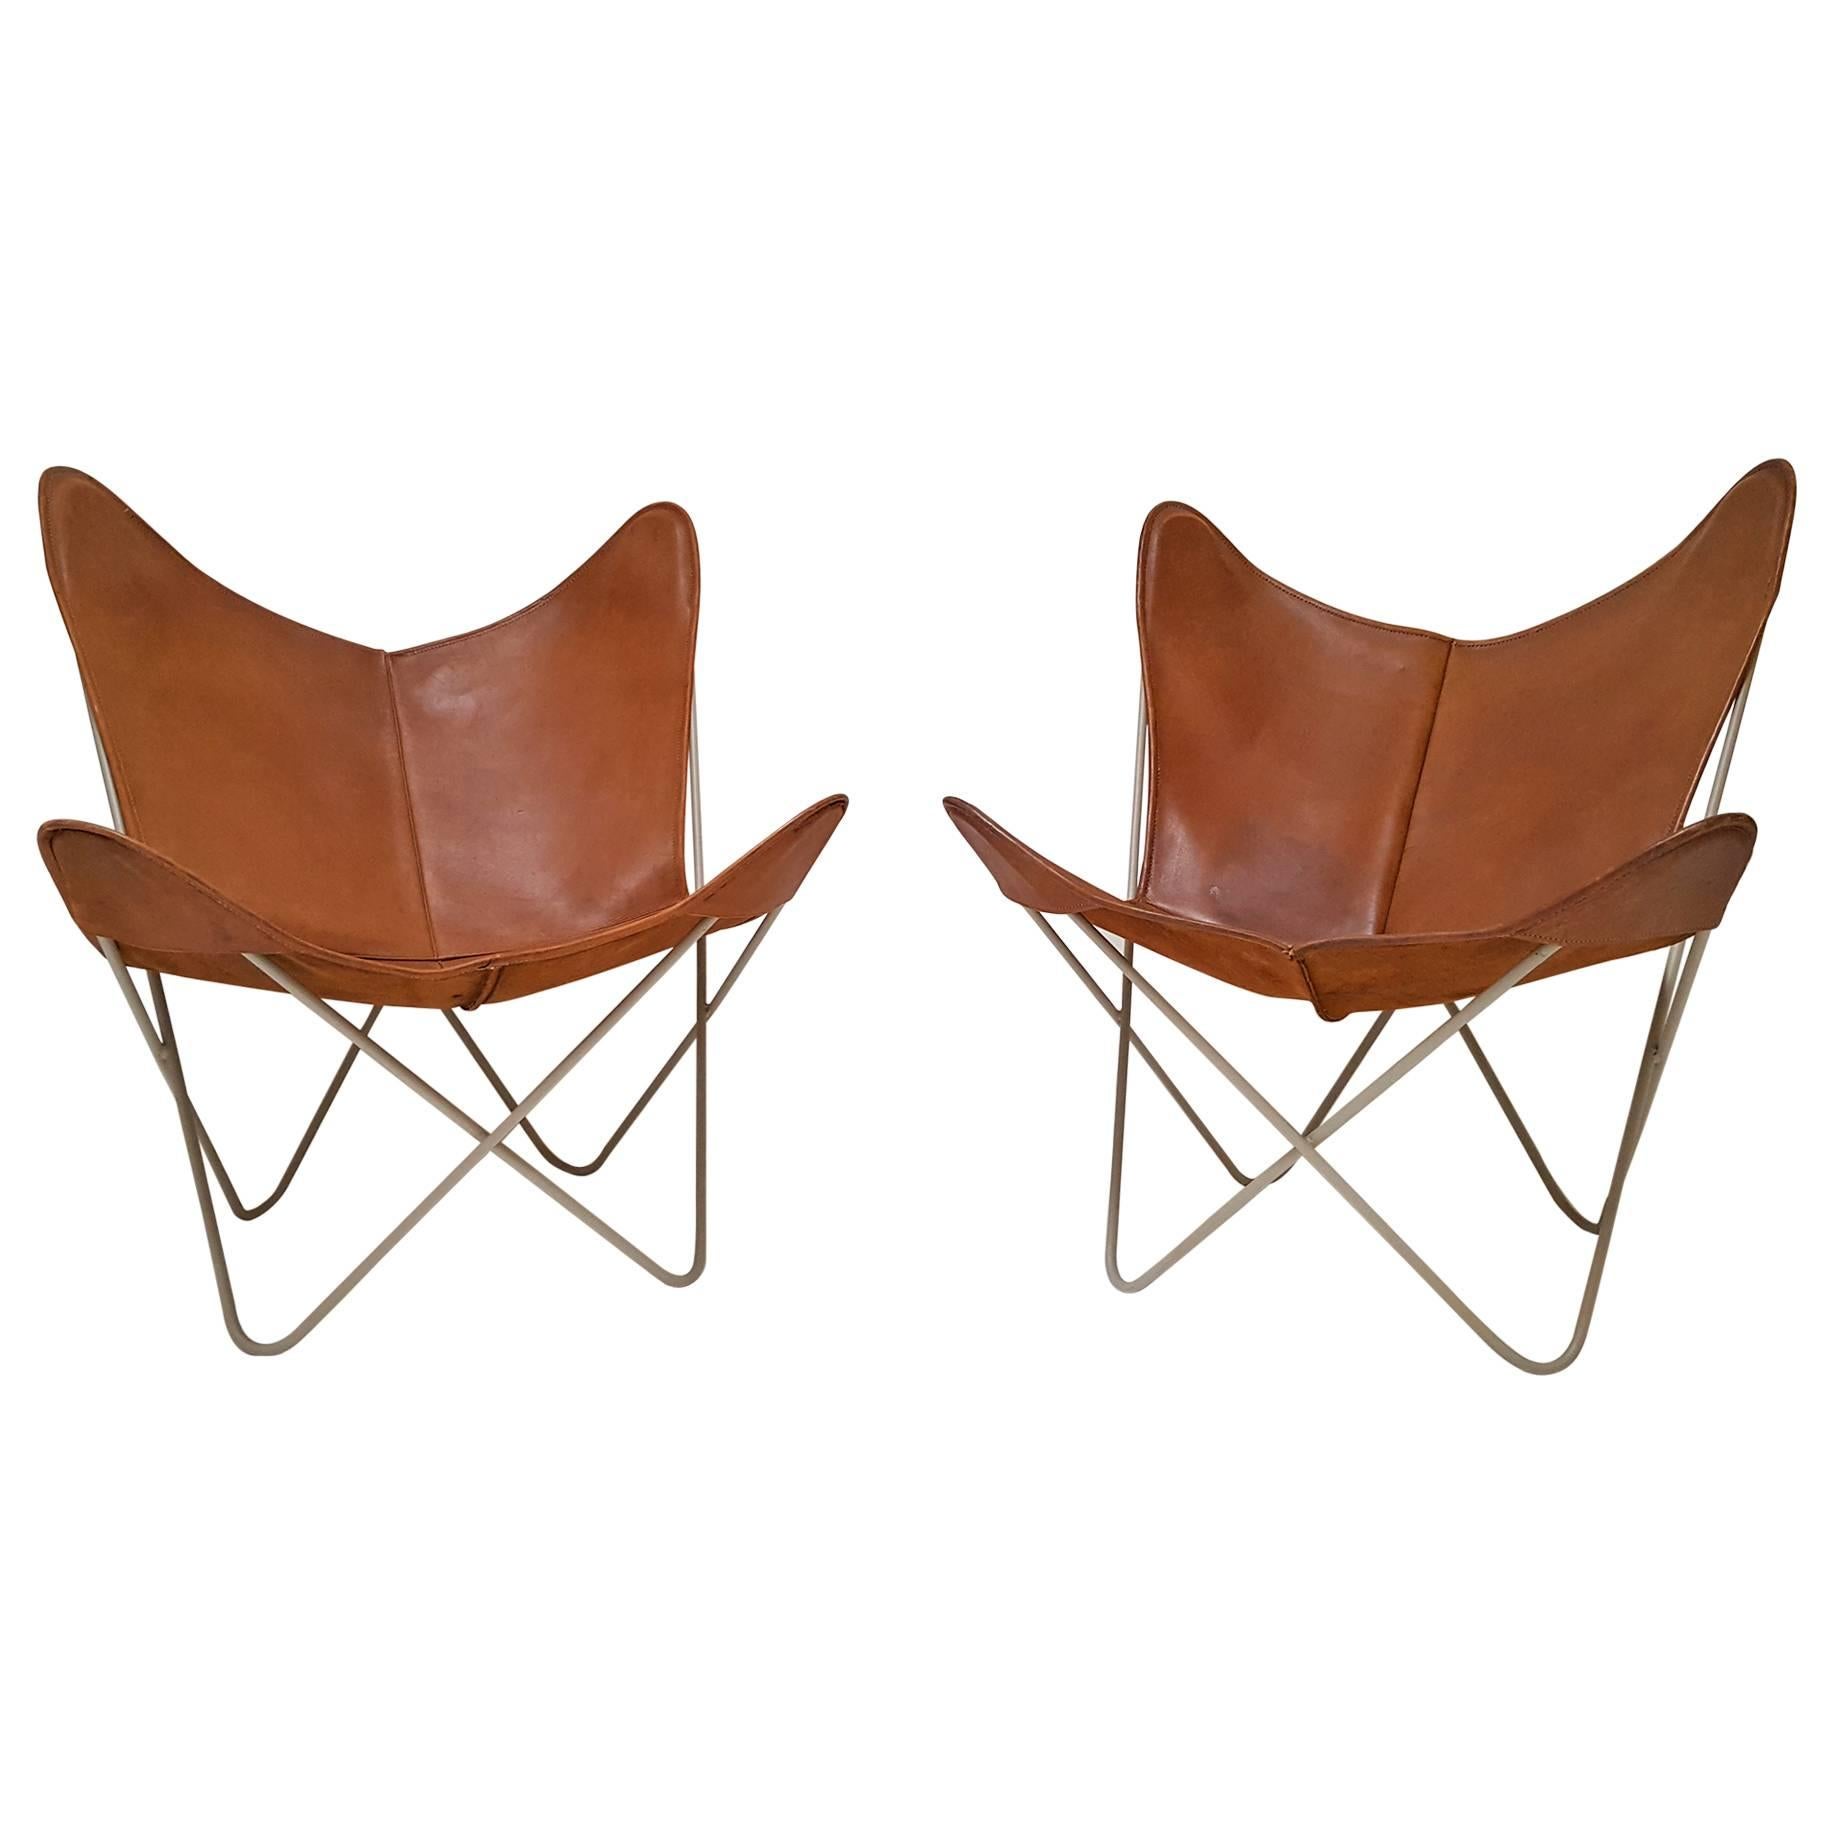 Knoll Hardoy Butterfly Sling Chairs 1954 brown leather